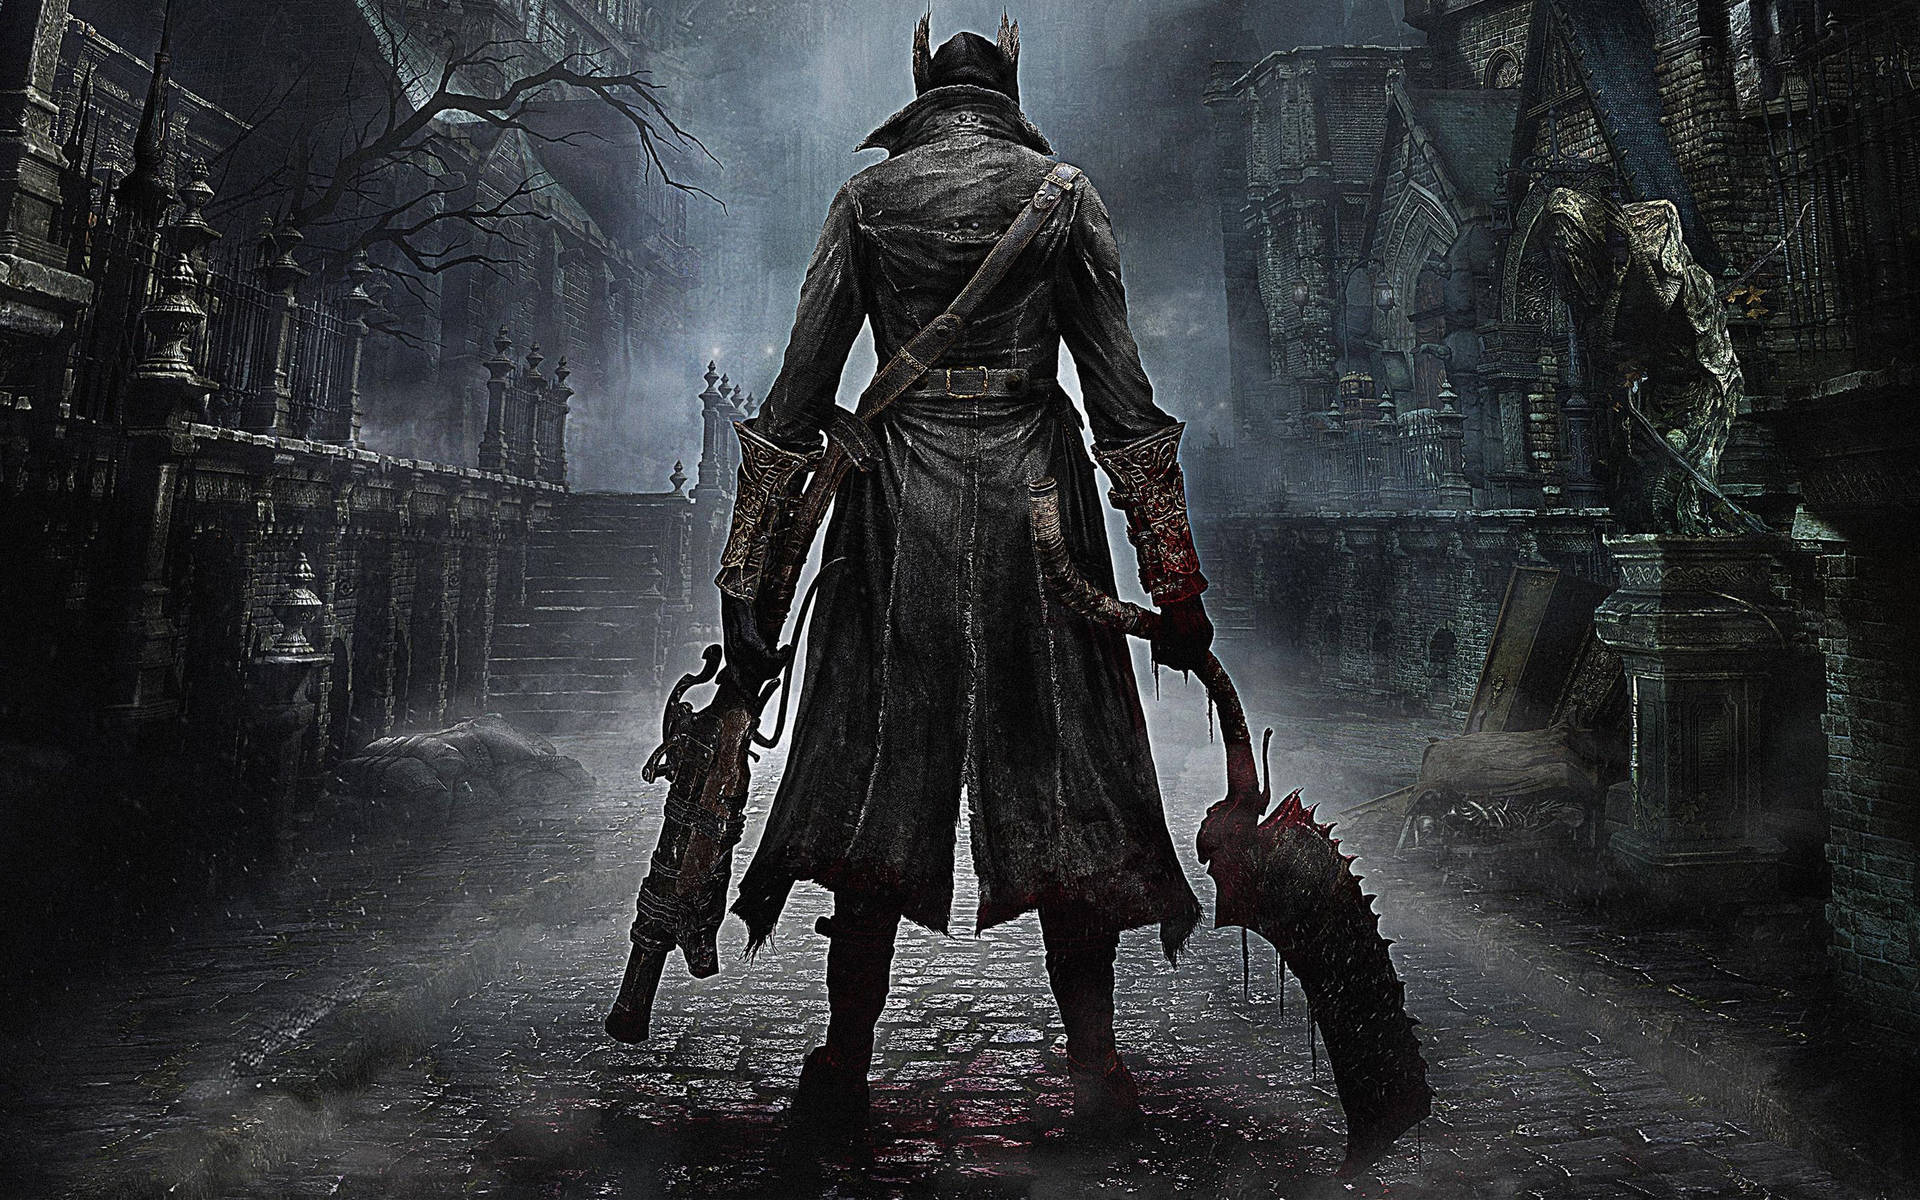 Hunter Bloodborne Action Role Playing Computer Game Wallpaper